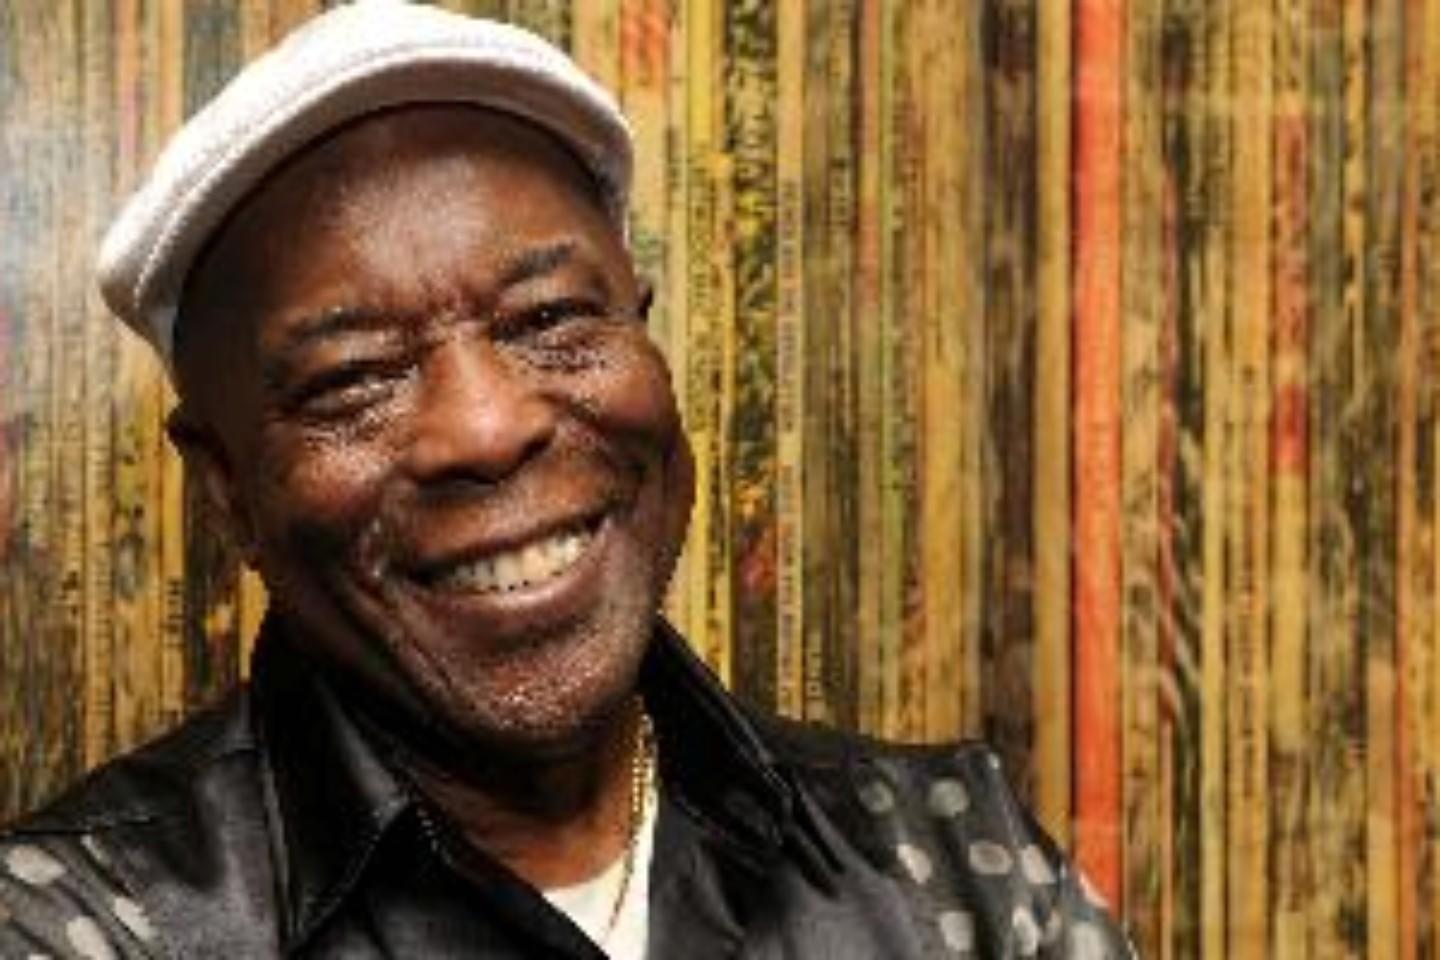 Buddy Guy Tickets Buddy Guy Tour Dates 2023 and Concert Tickets viagogo